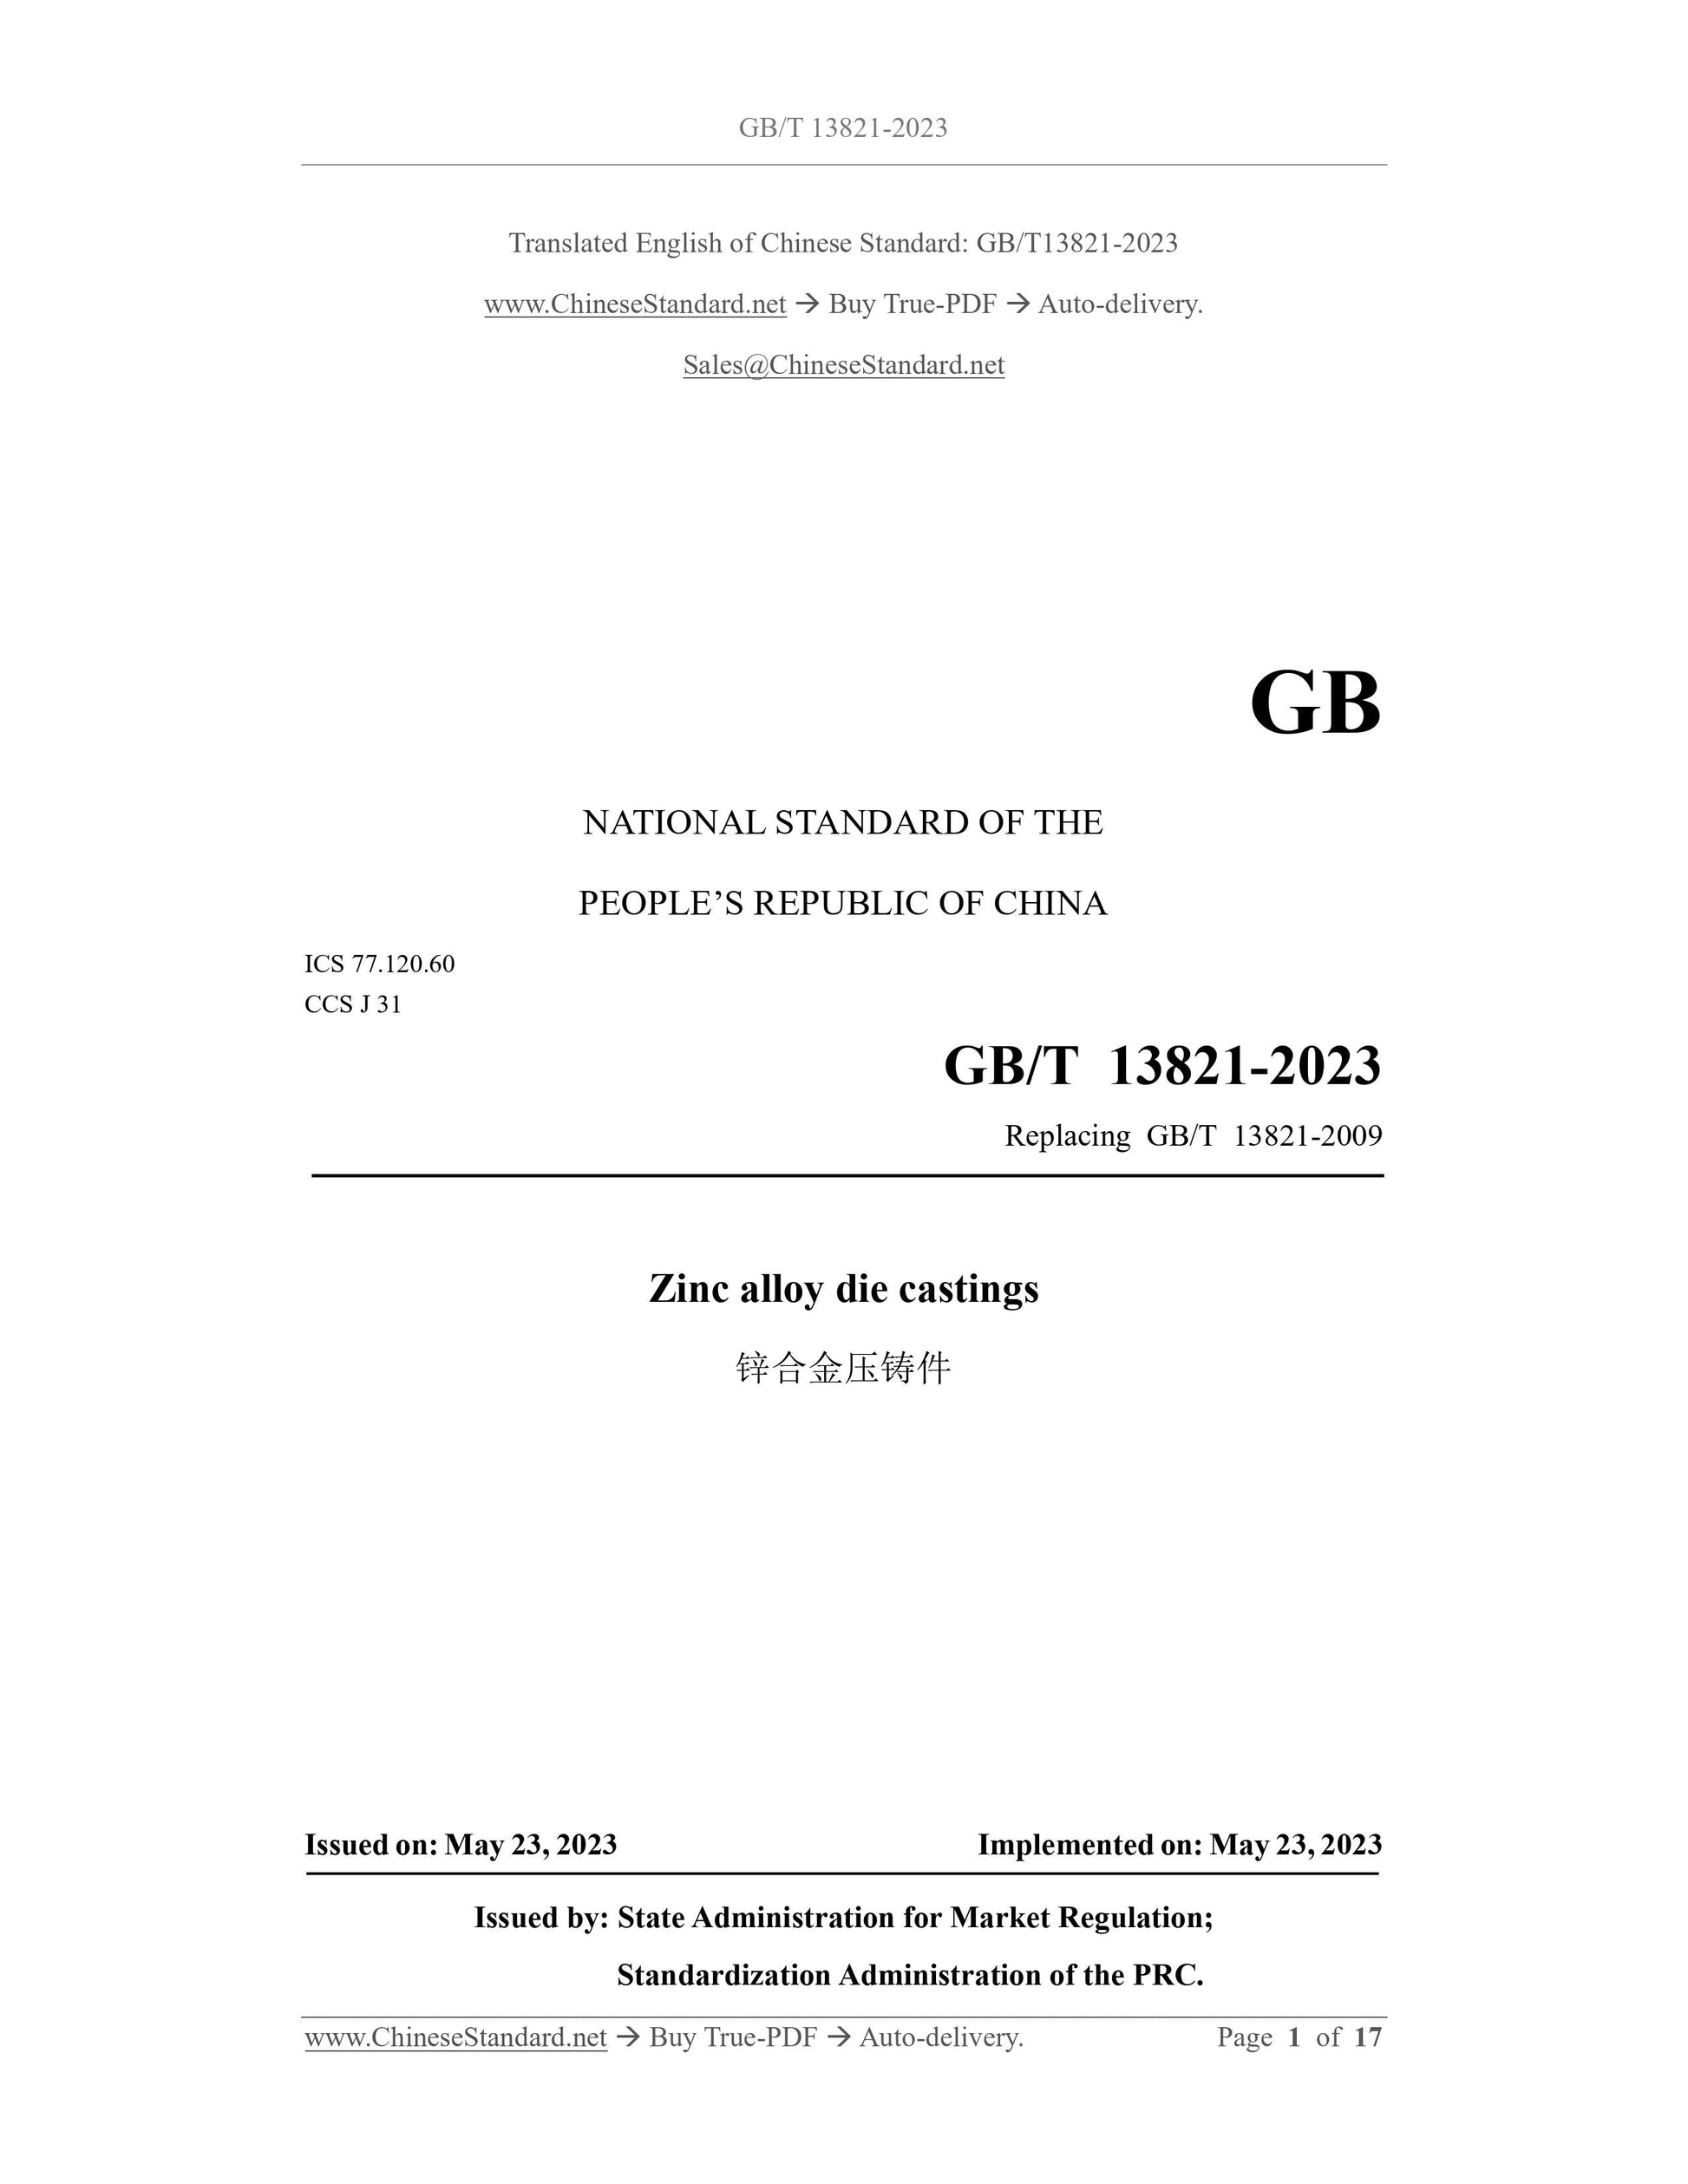 GB/T 13821-2023 Page 1